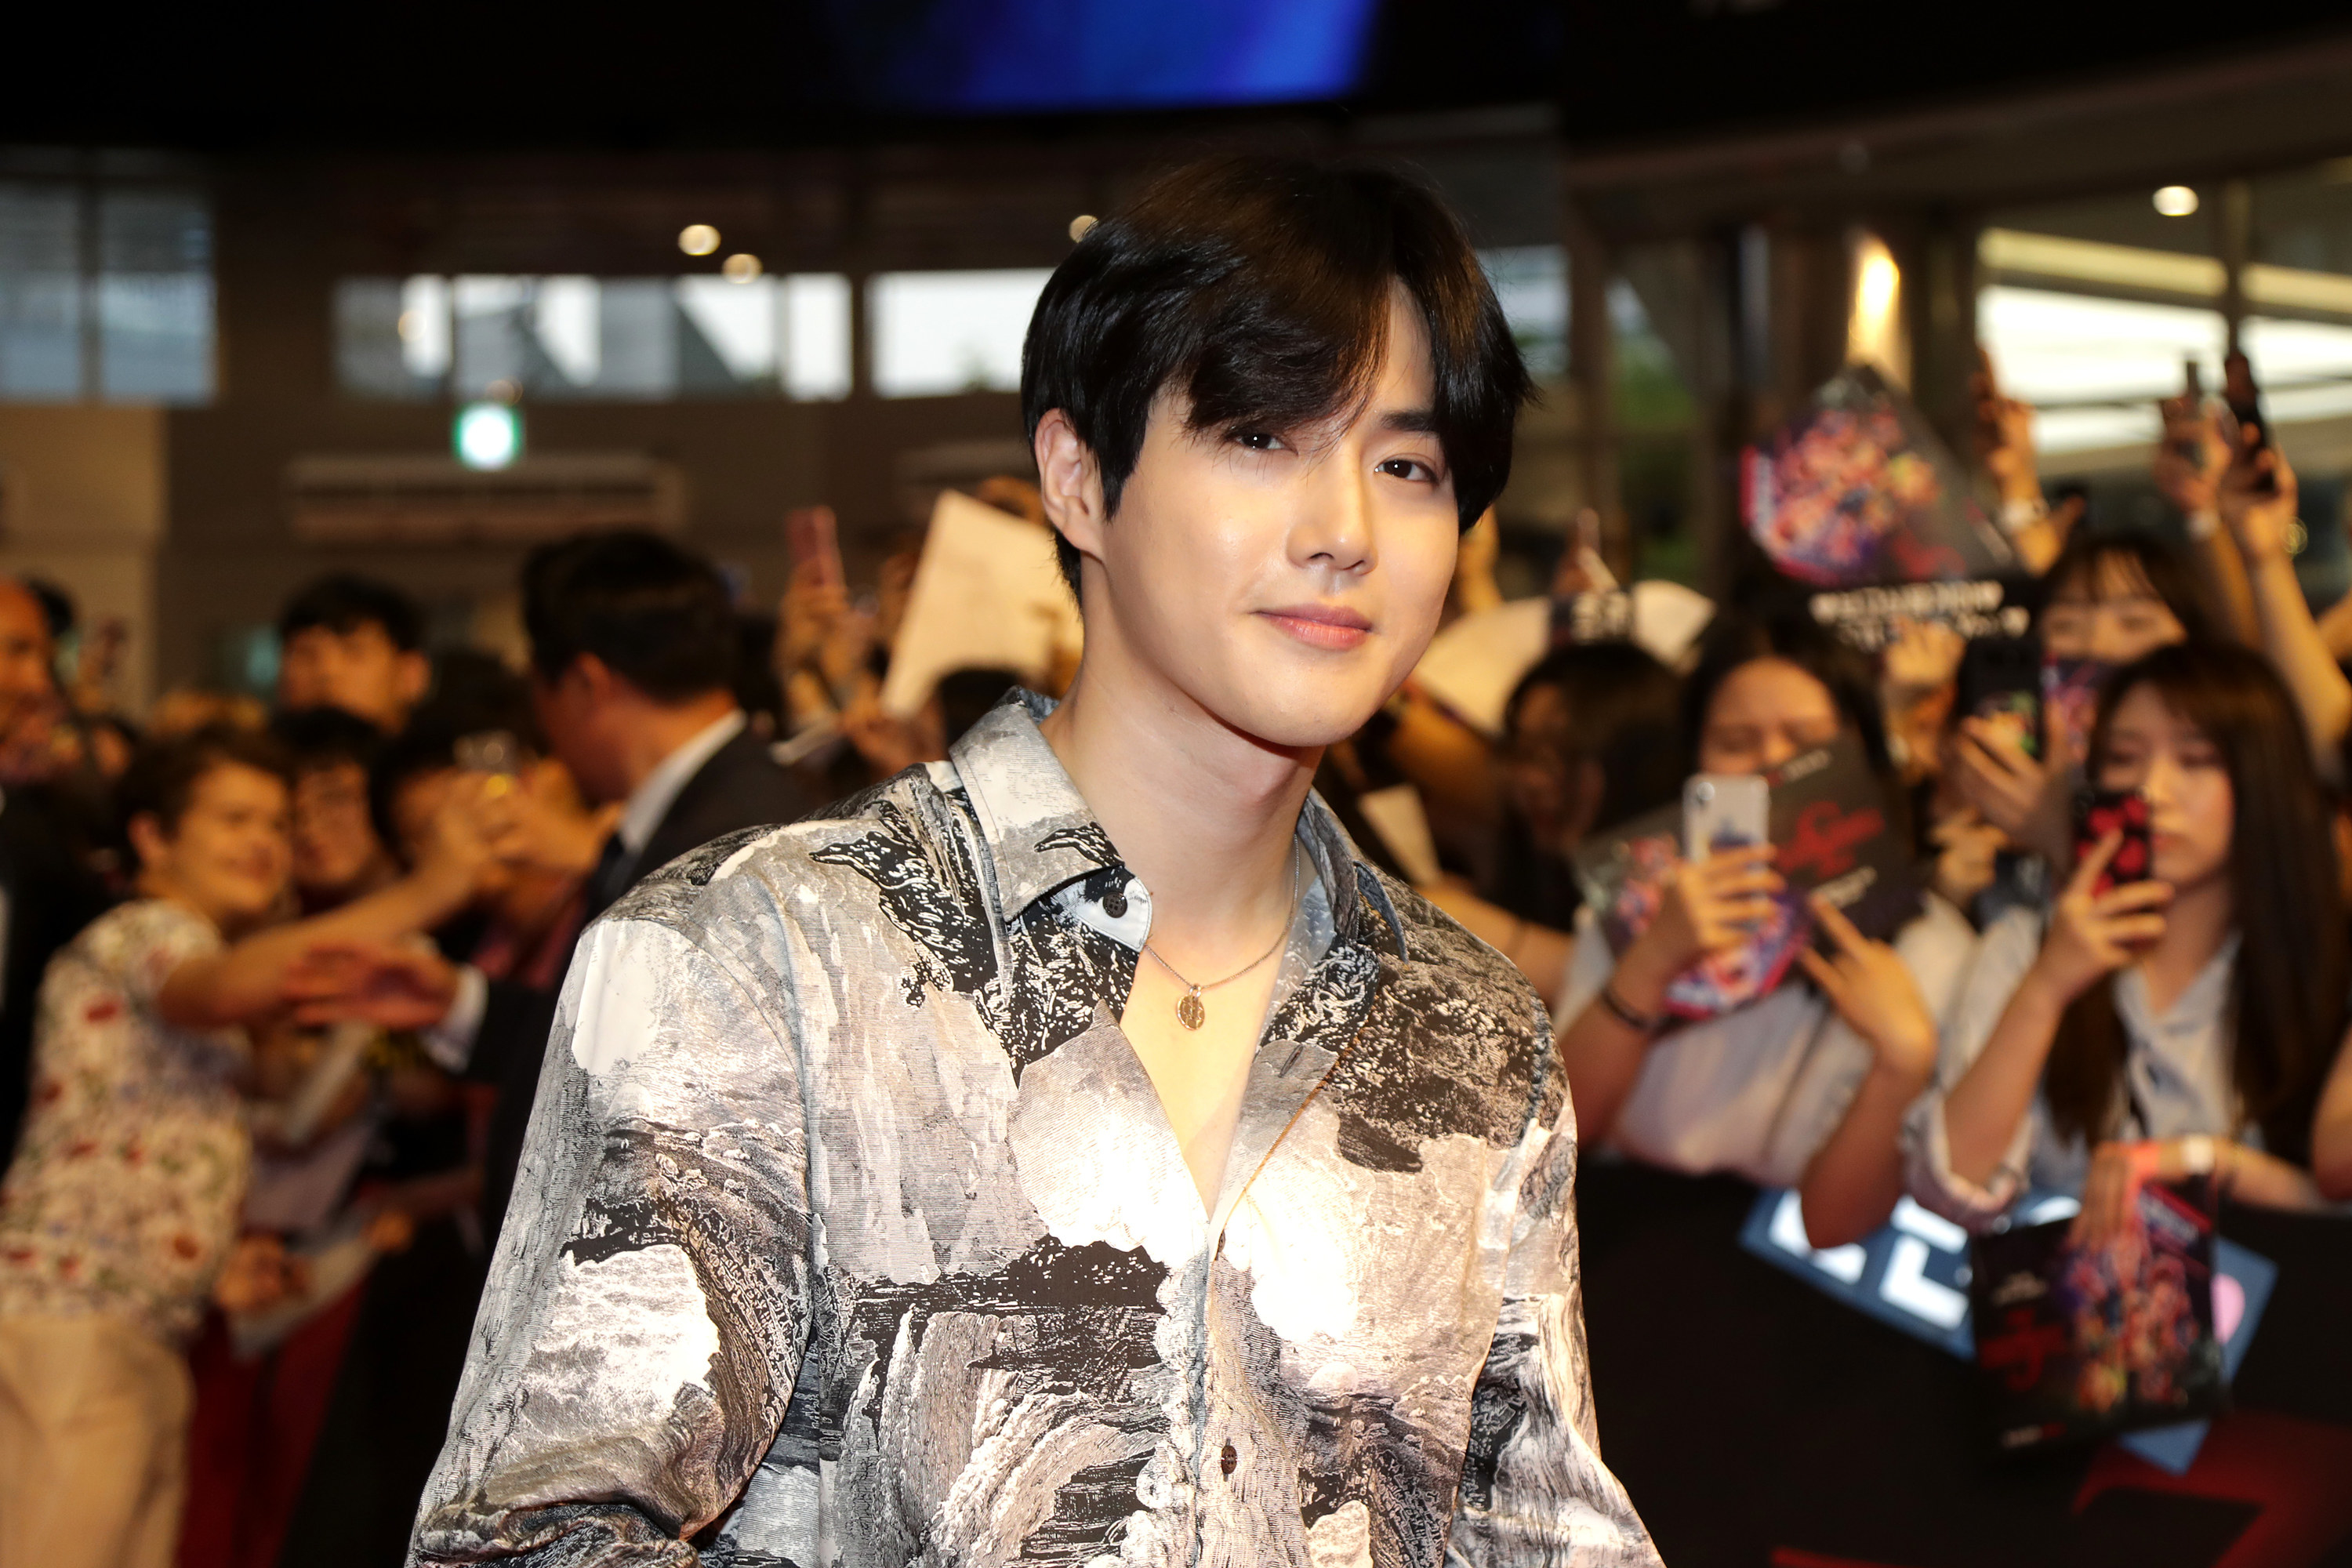 Suho smiles at the camera with floppy hair falling into his eyes; in the background, there are fans taking photos of him